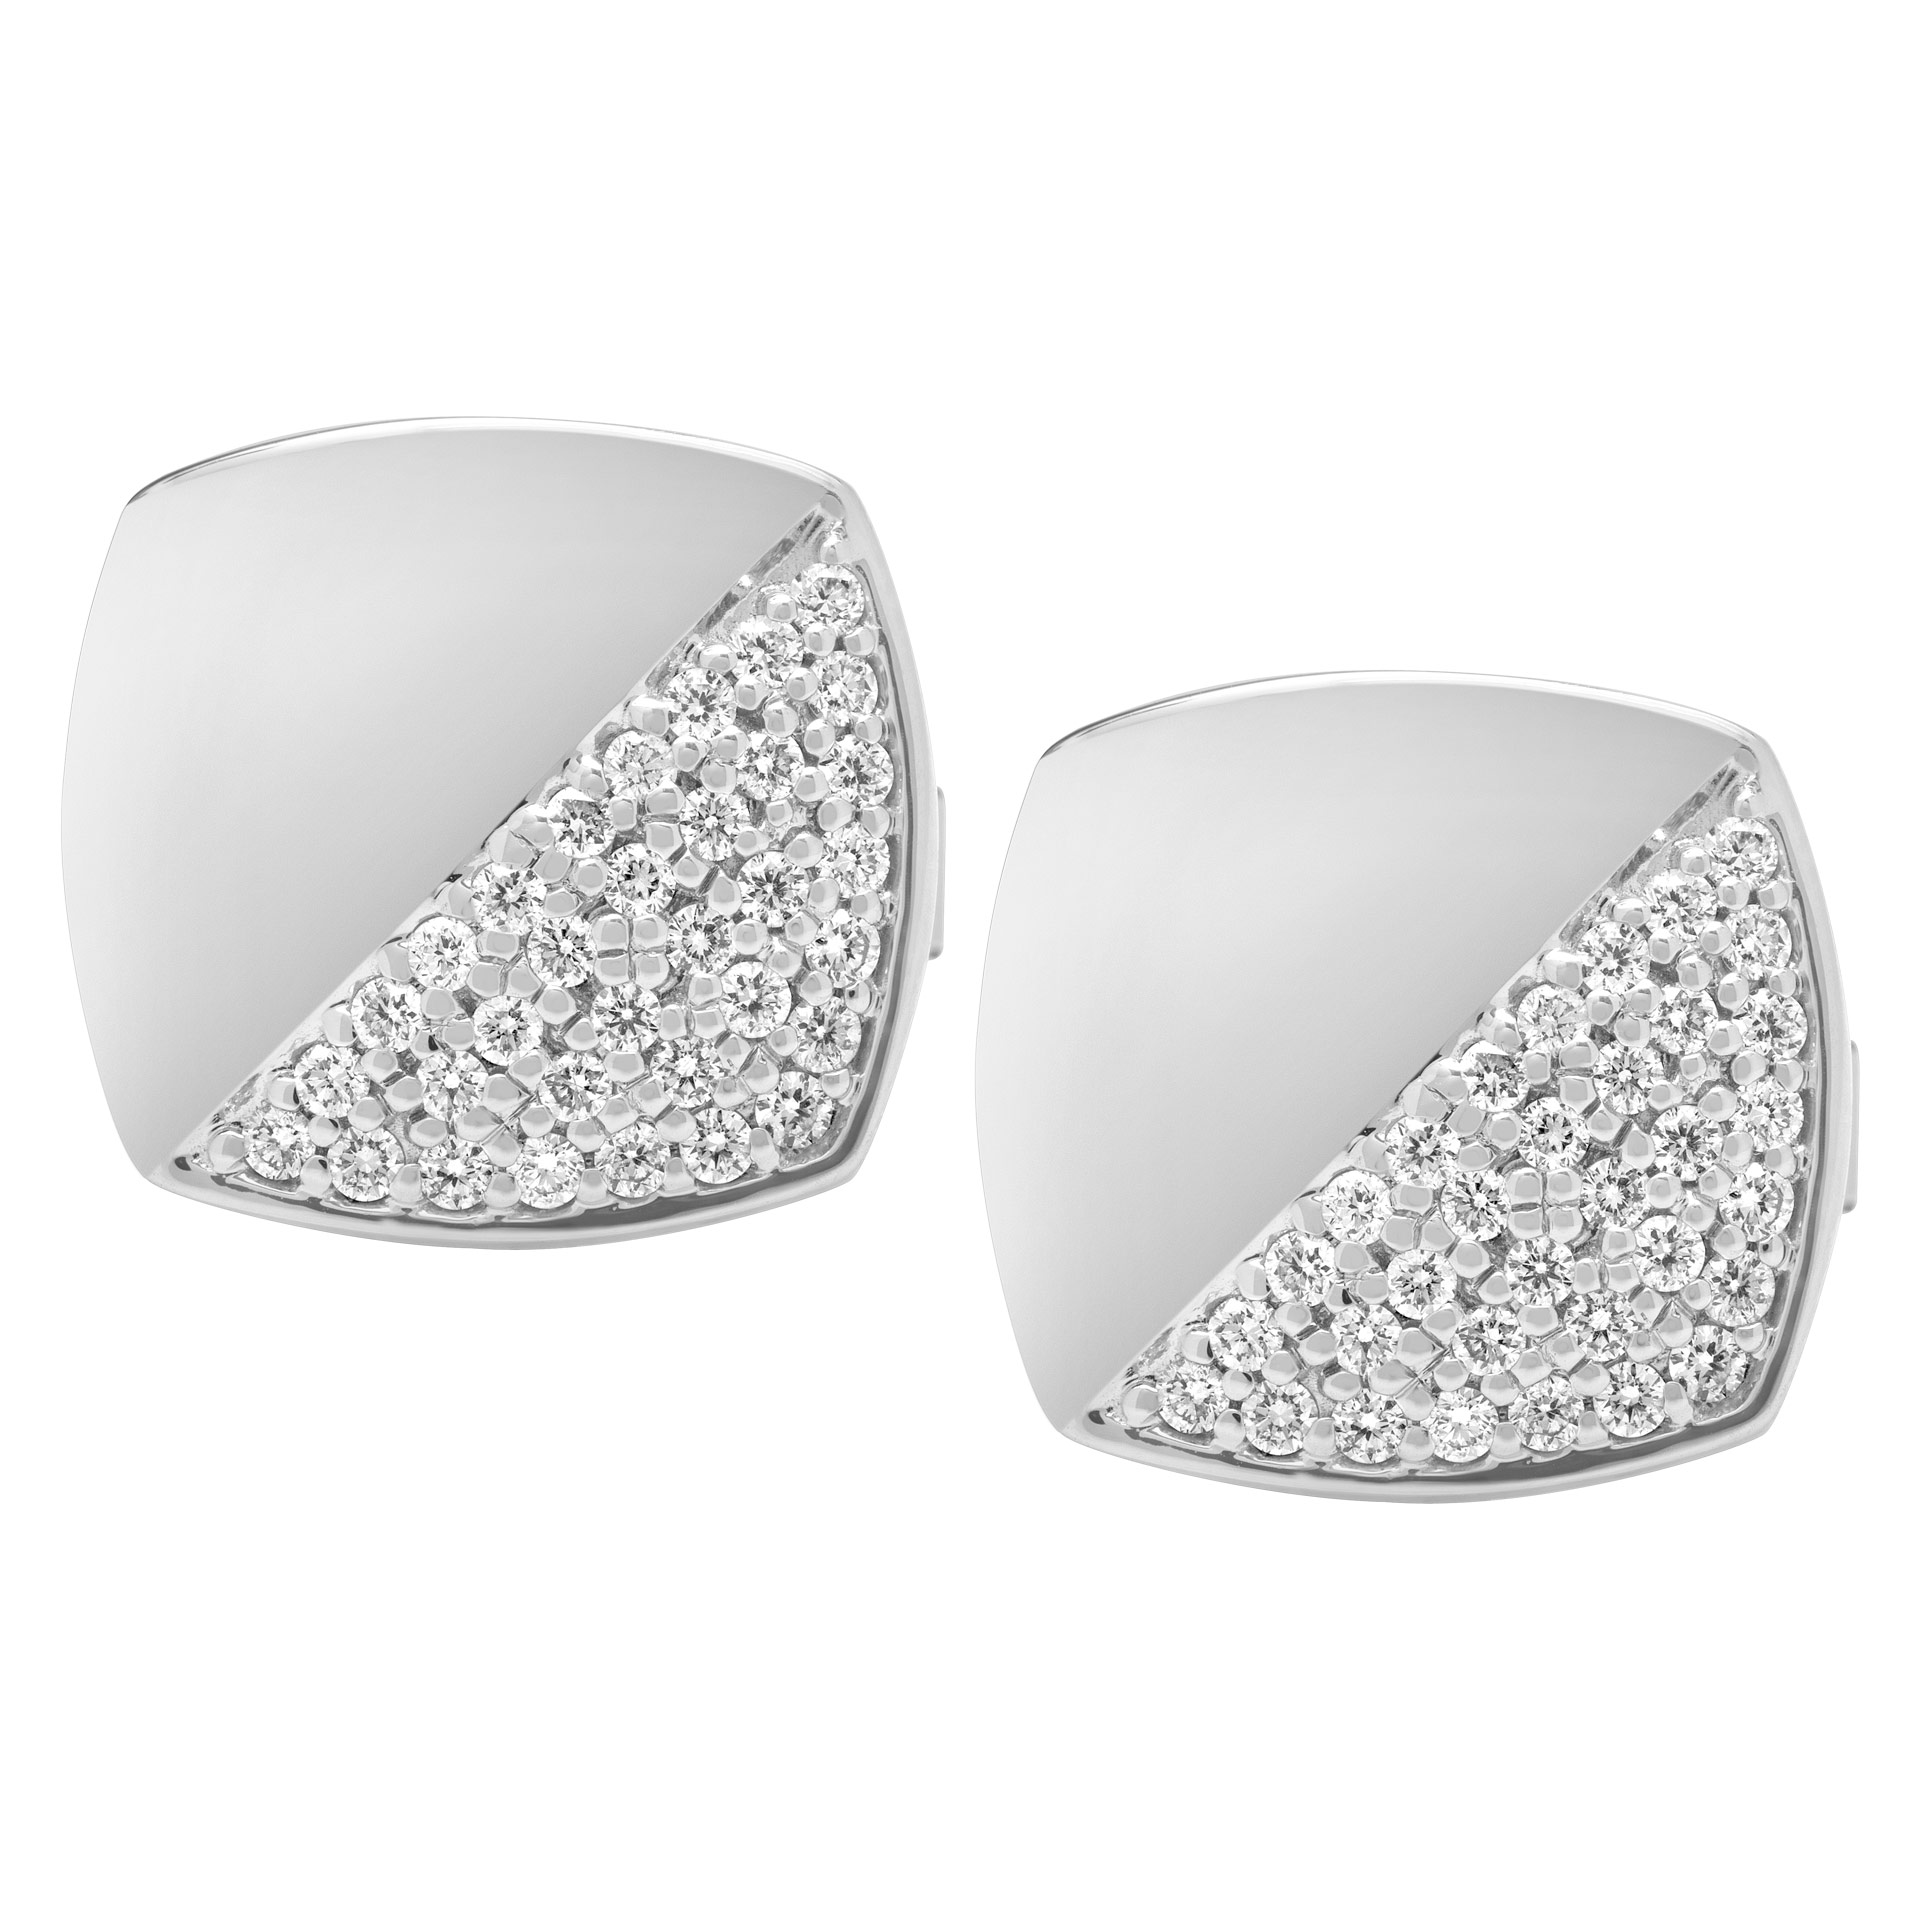 New square 18k white gold cufflinks with pave set diamonds. 1.07 carats image 1